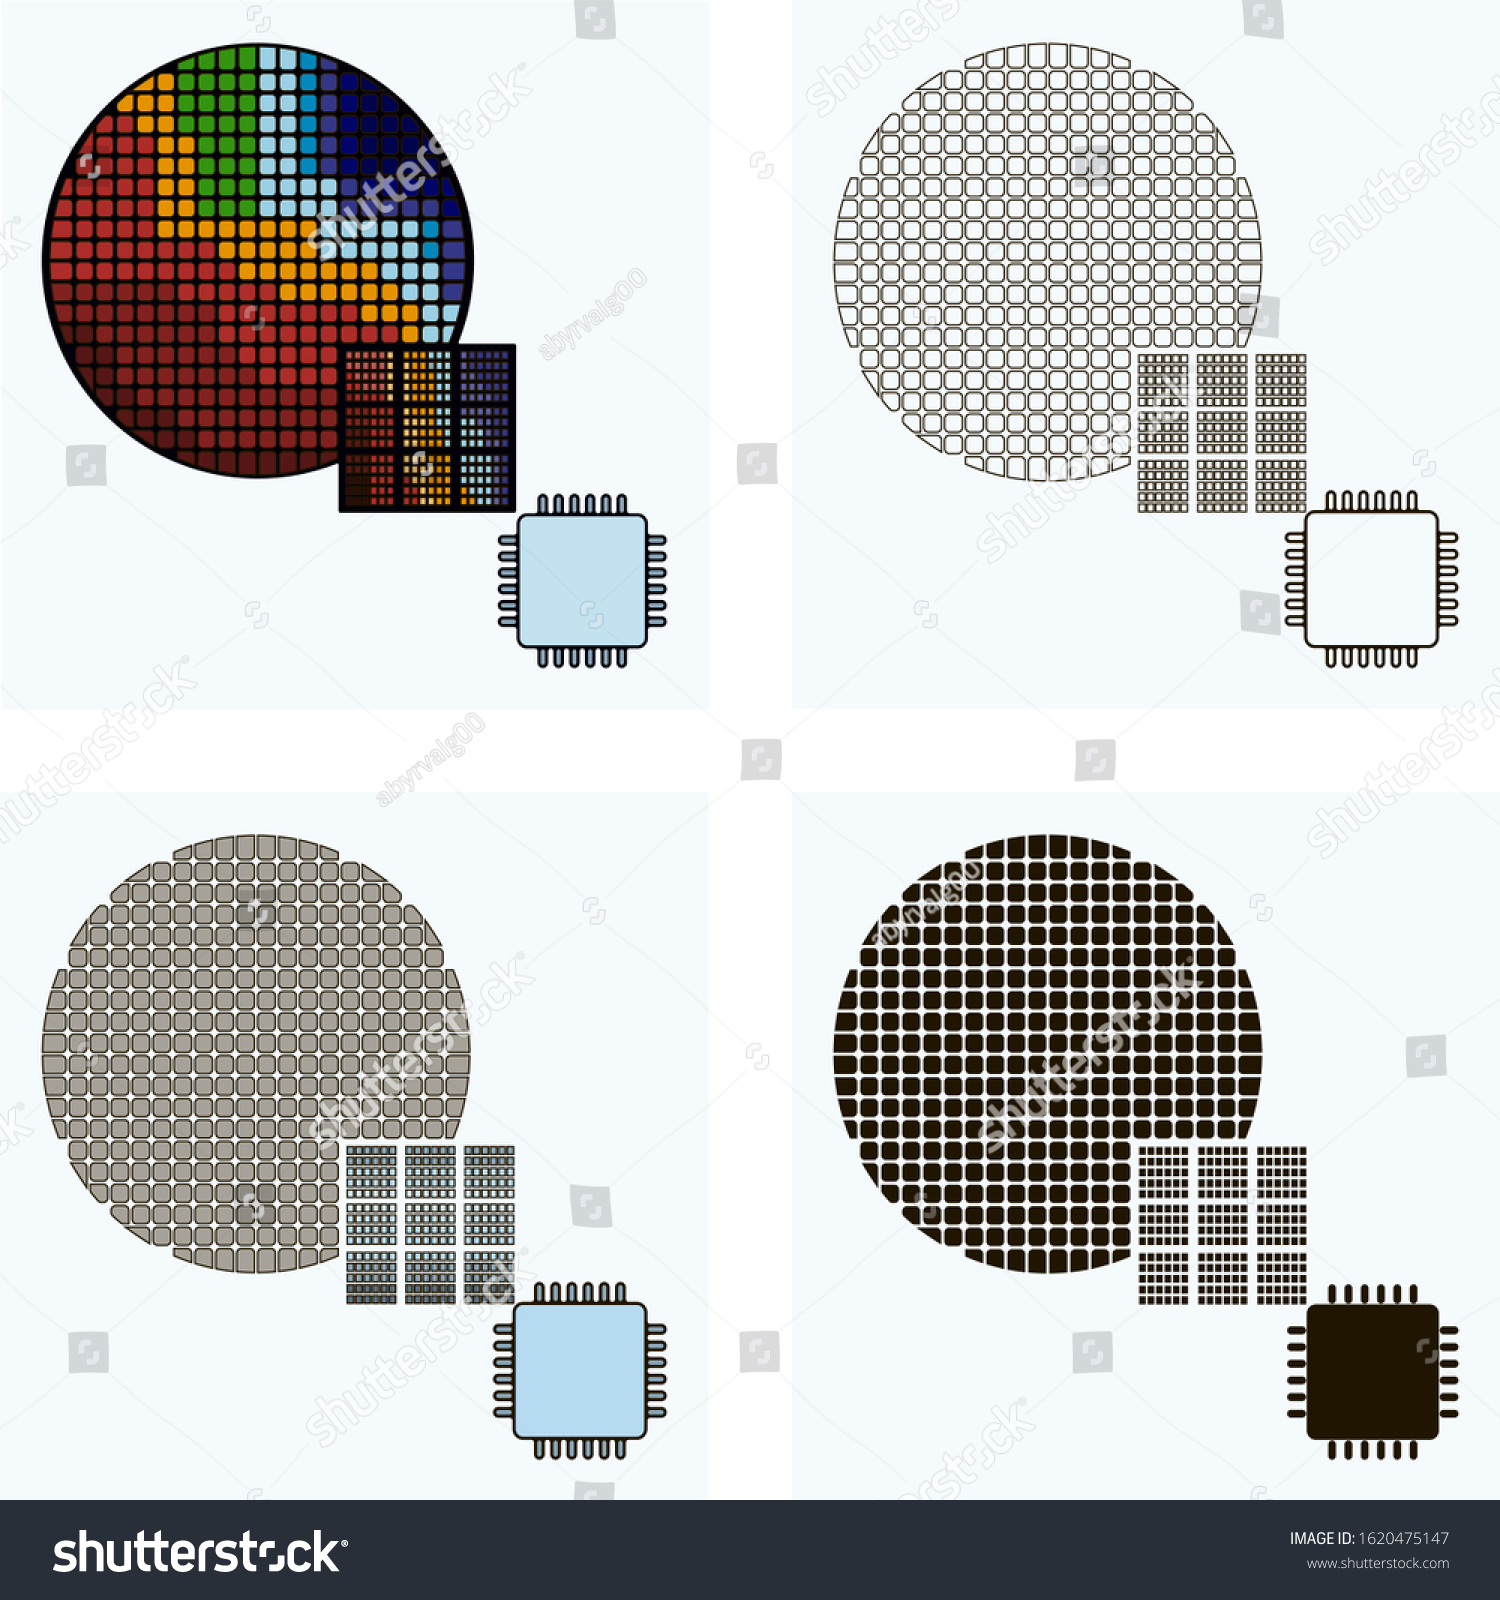 SVG of Set of abstract  line art vector industry icons featuring electronics or semiconductor circuits manufacturing or  fab production process with semiconductor  wafer, printed circuits, microchips.  svg